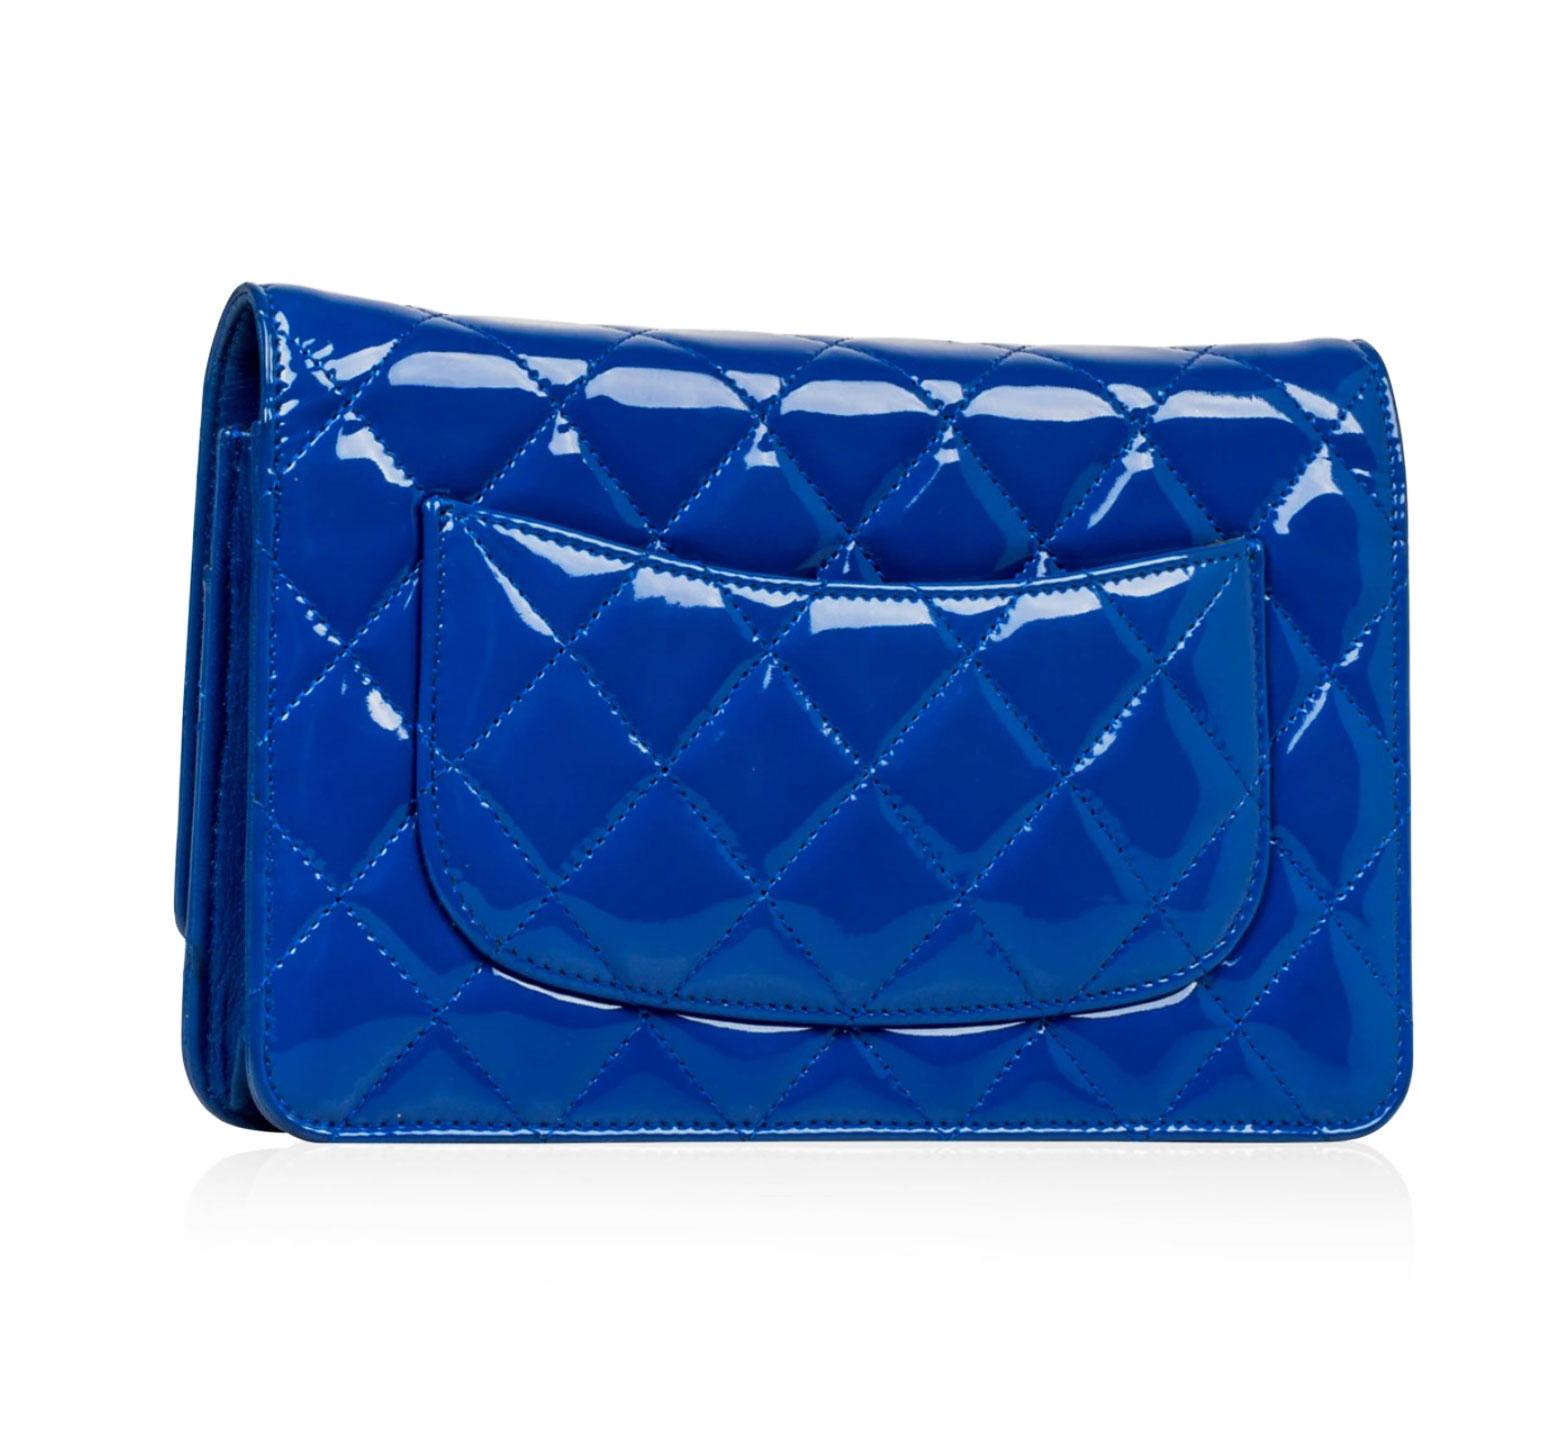 Women's or Men's Rare Superman Blue Brand New Chanel 2014 Wallet on Chain WOC Patent Leather Bag For Sale